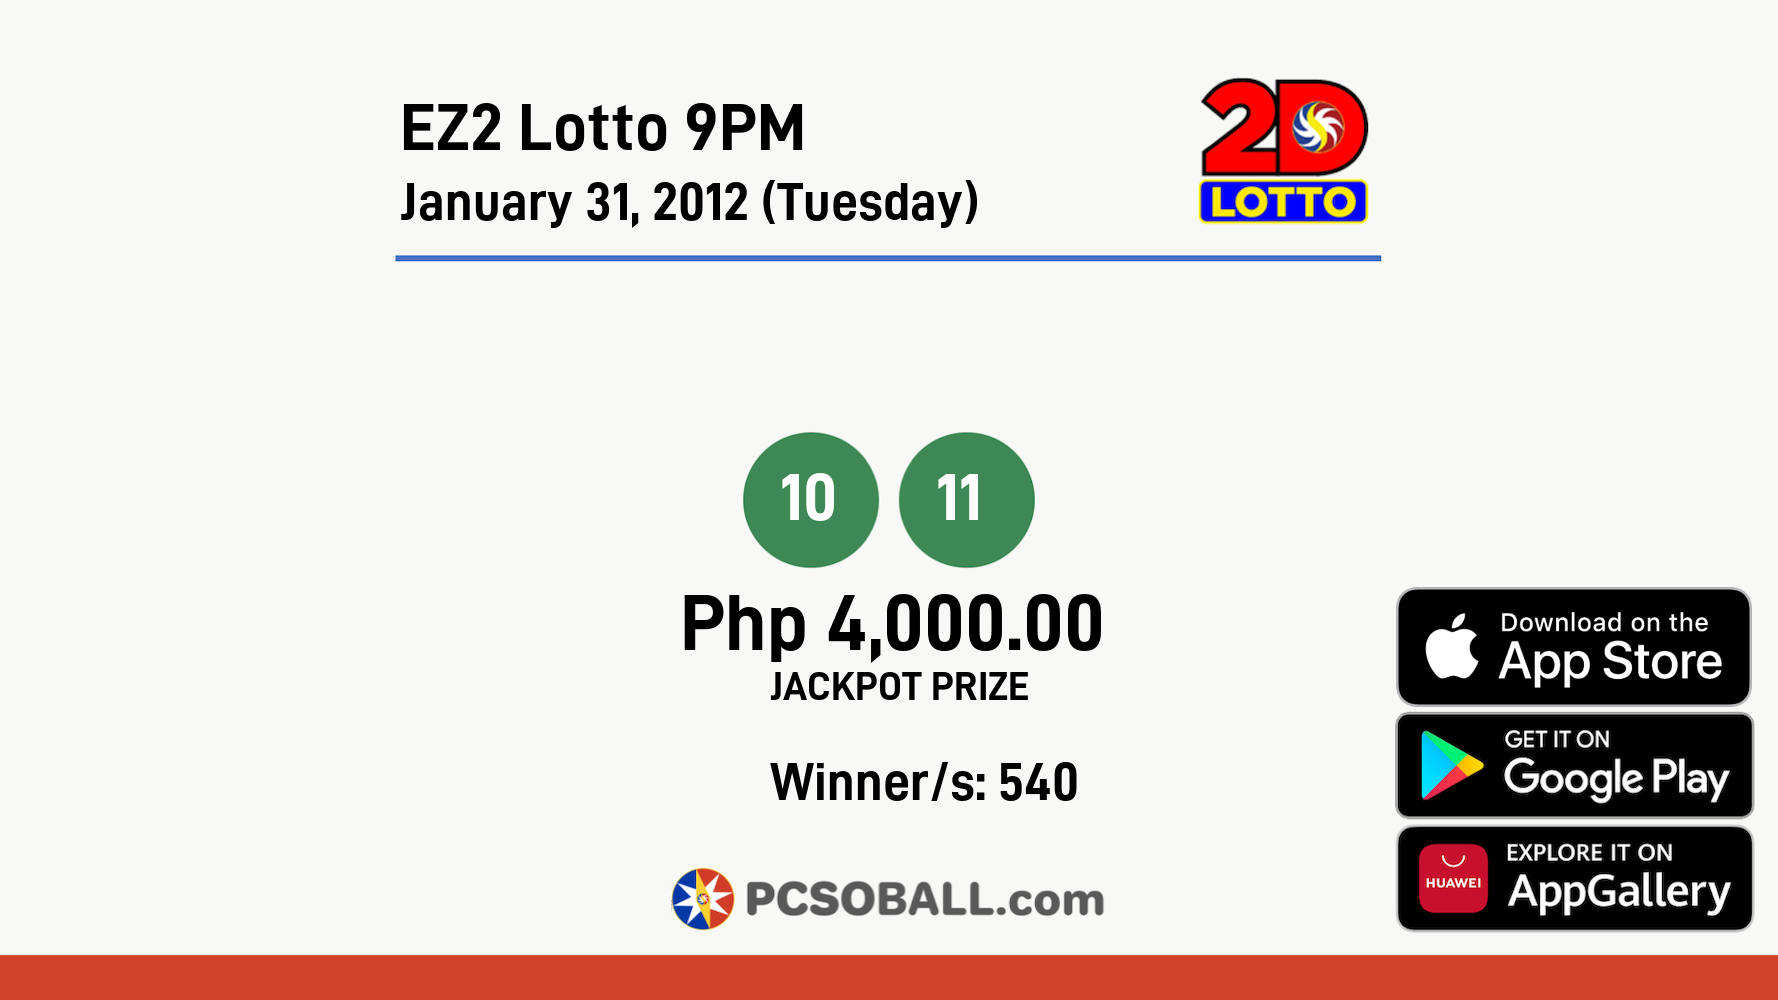 EZ2 Lotto 9PM January 31, 2012 (Tuesday) Result